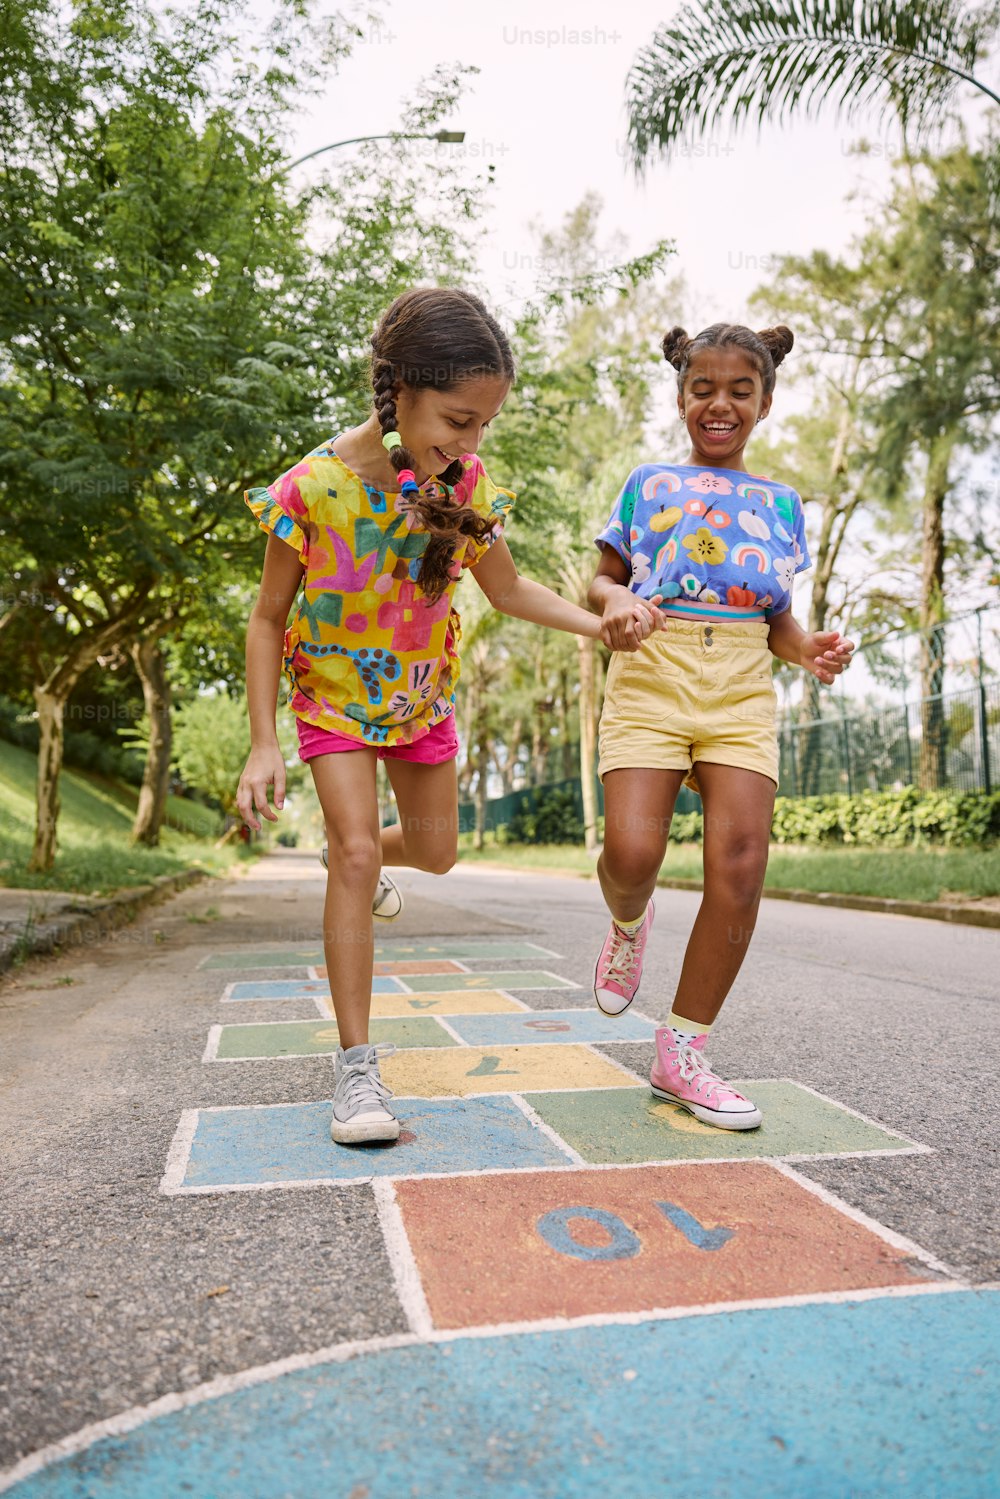 two young girls are running on a painted path